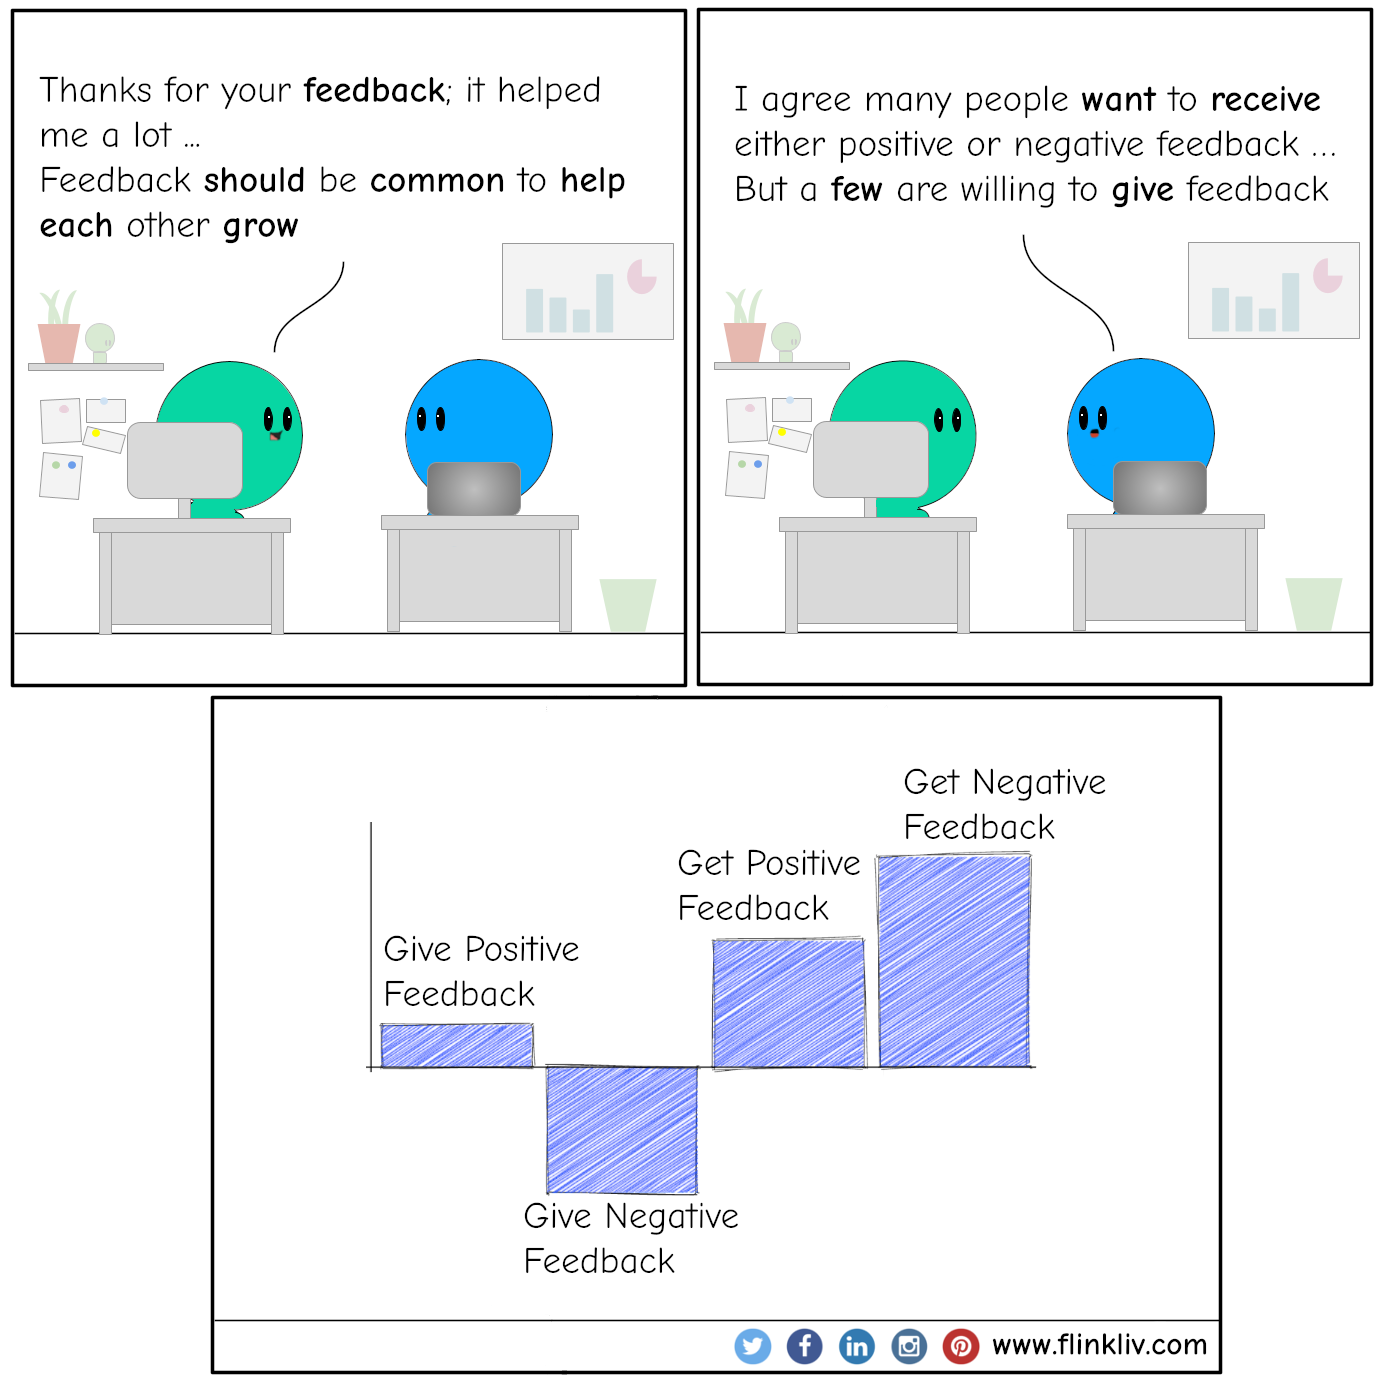 Conversation between A and B about feedback. A: Thanks for your feedback; it helped me a lot. Btw, feedback should be common to help each other grow. B: I agree many people want to receive either positive or negative feedback, but a few are willing to give feedback. By flinkliv.com